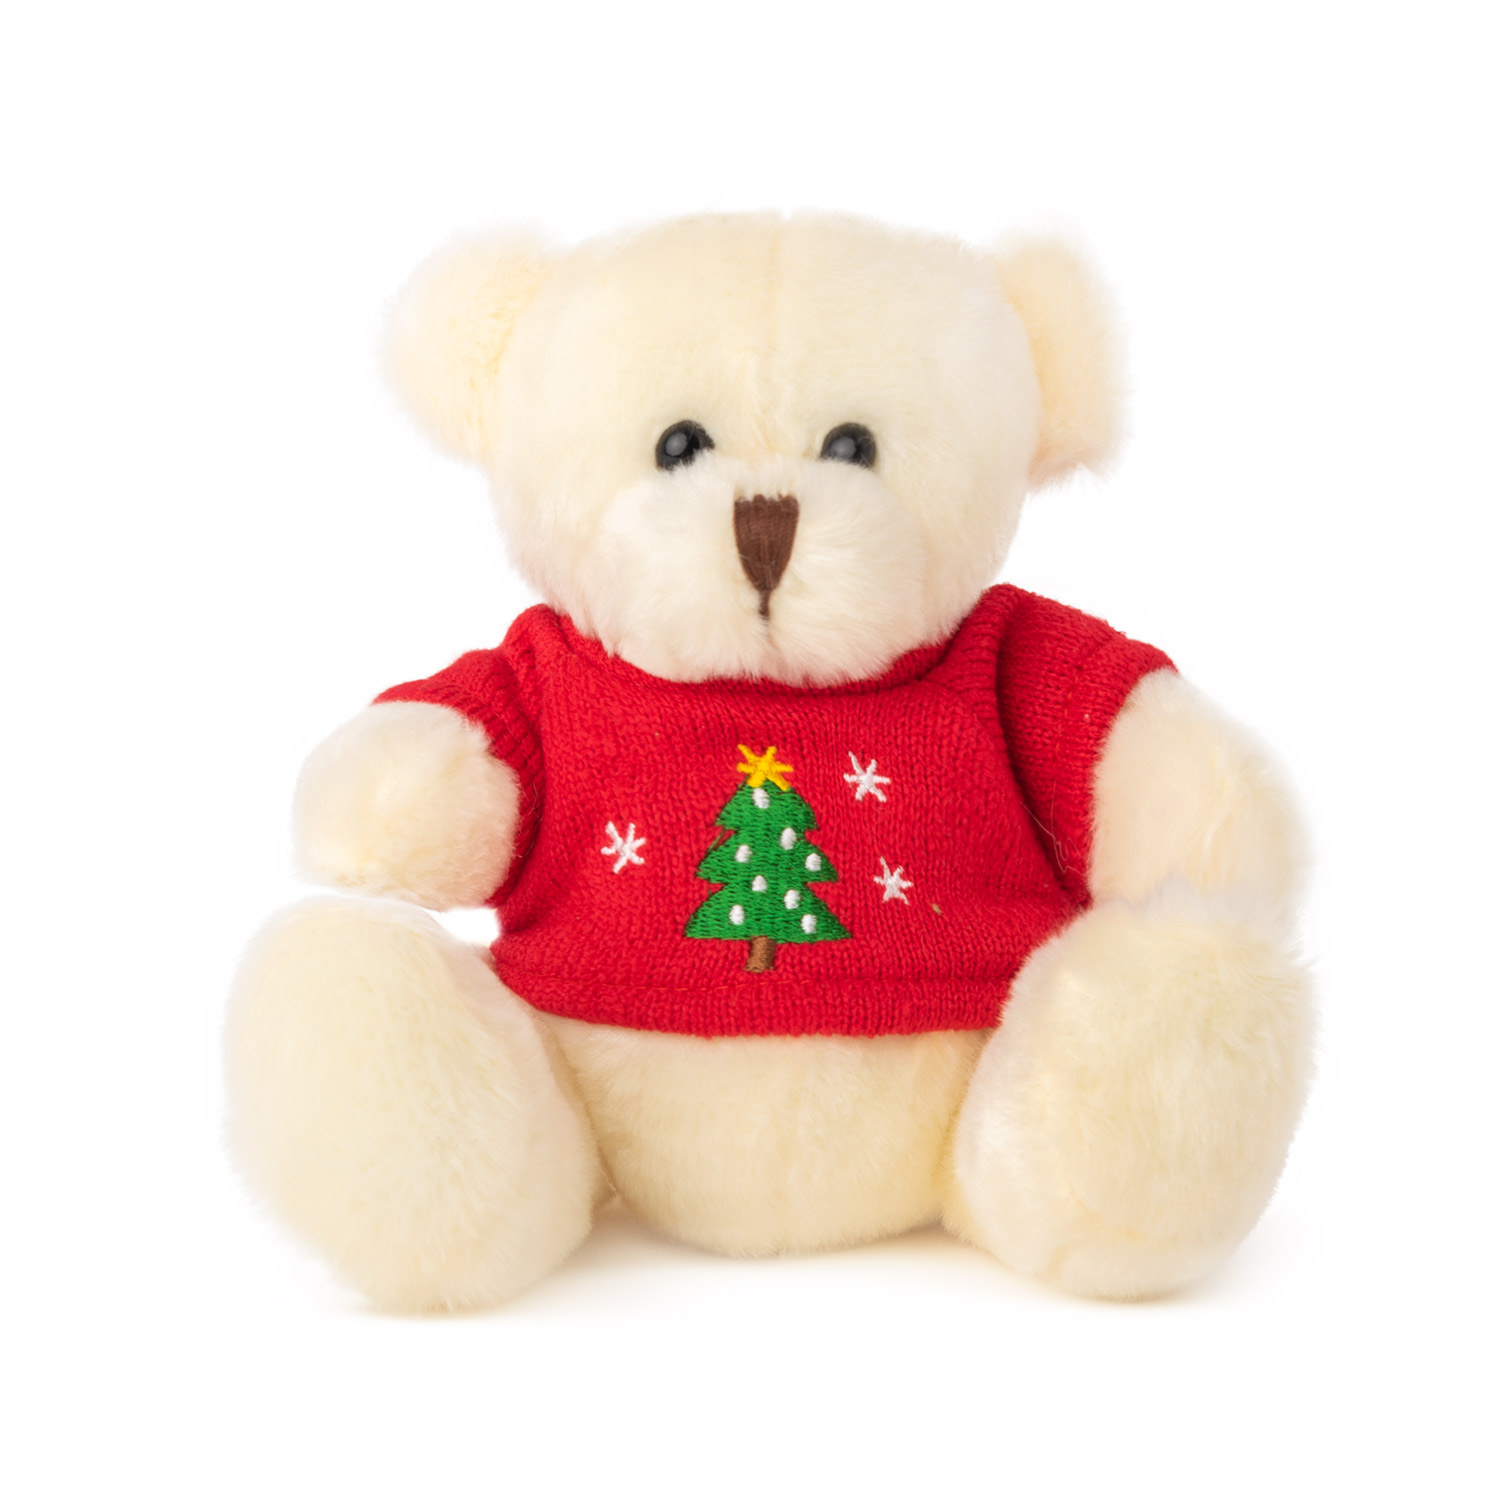 Bear with Christmas sweater - White